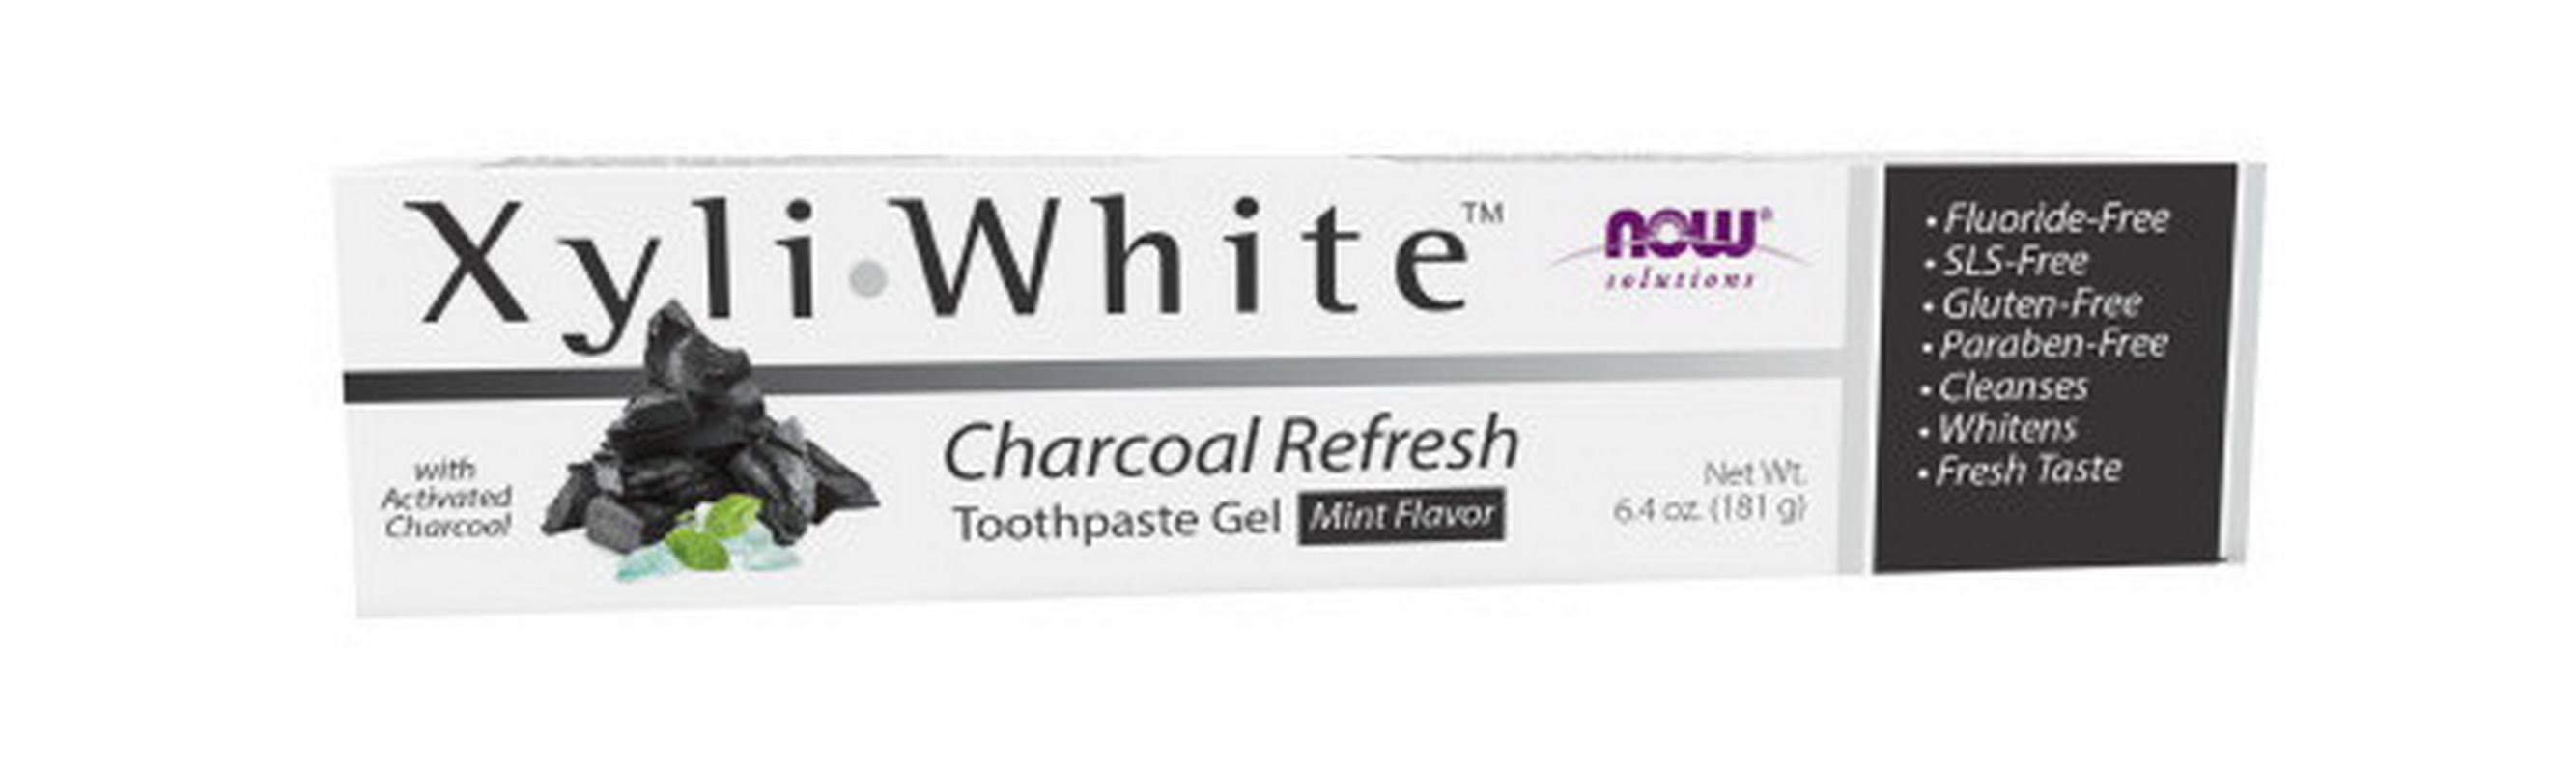 Now Foods XyliWhite Charcoal Refresh Toothpaste Gel 6.4 oz